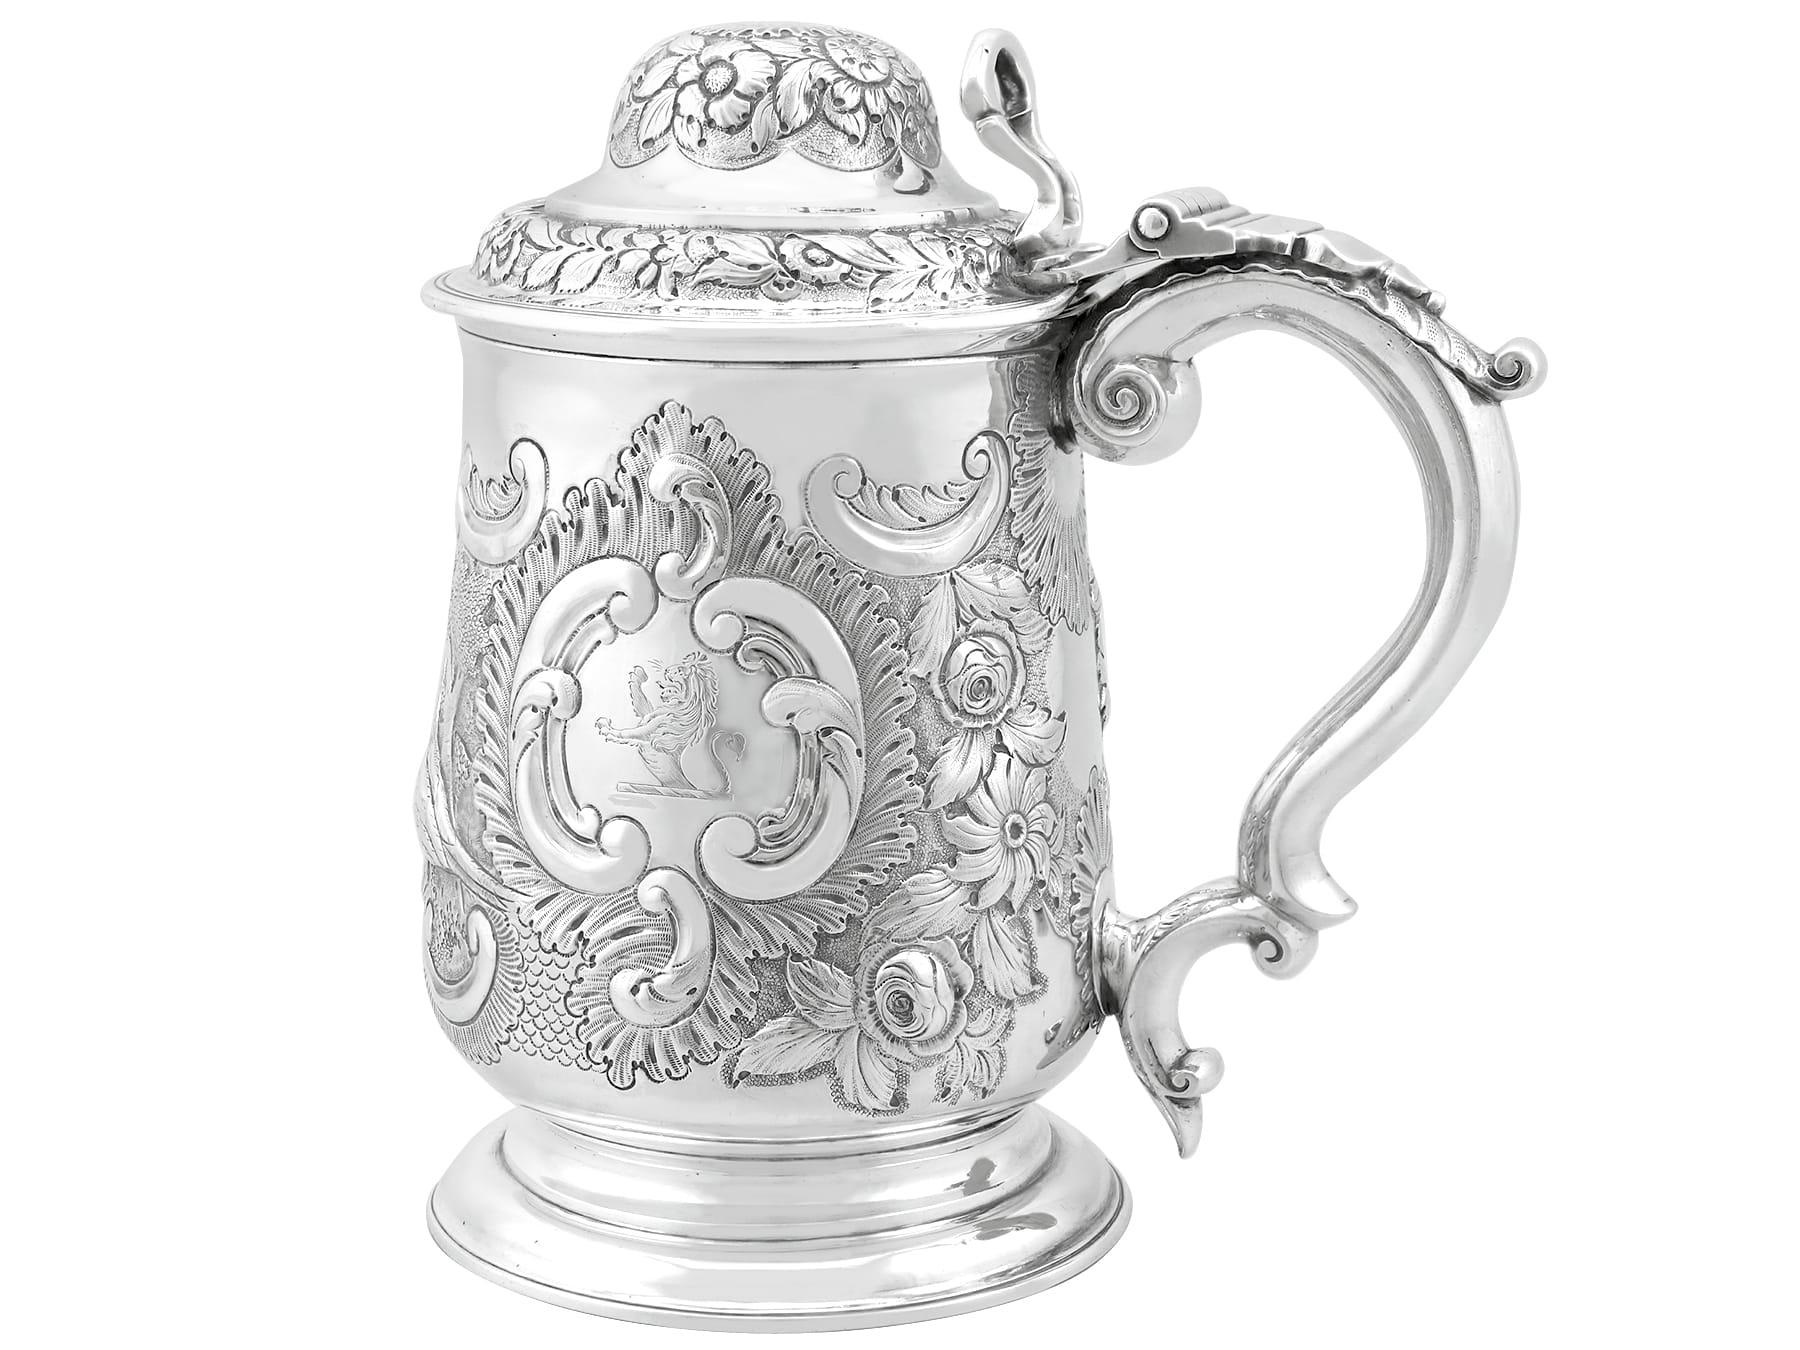 Antique George IV 1820s Sterling Silver Quart Tankard In Excellent Condition For Sale In Jesmond, Newcastle Upon Tyne